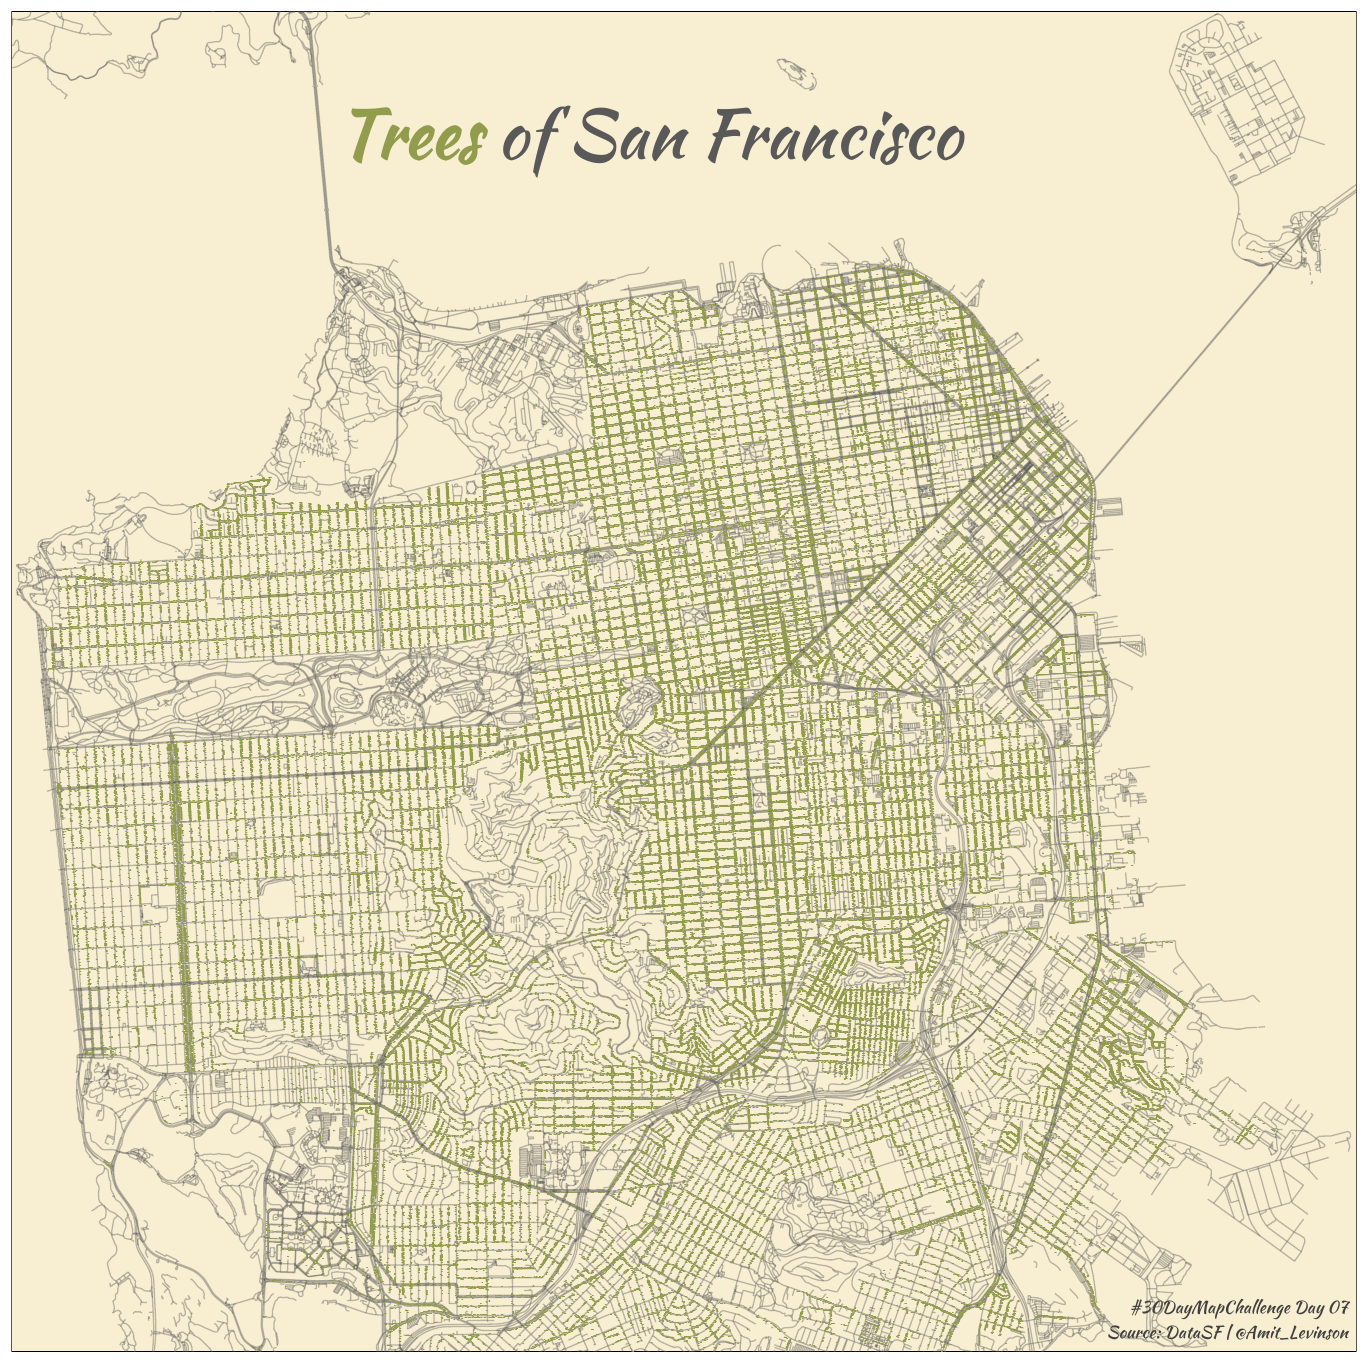 Mapping trees in San Francisco